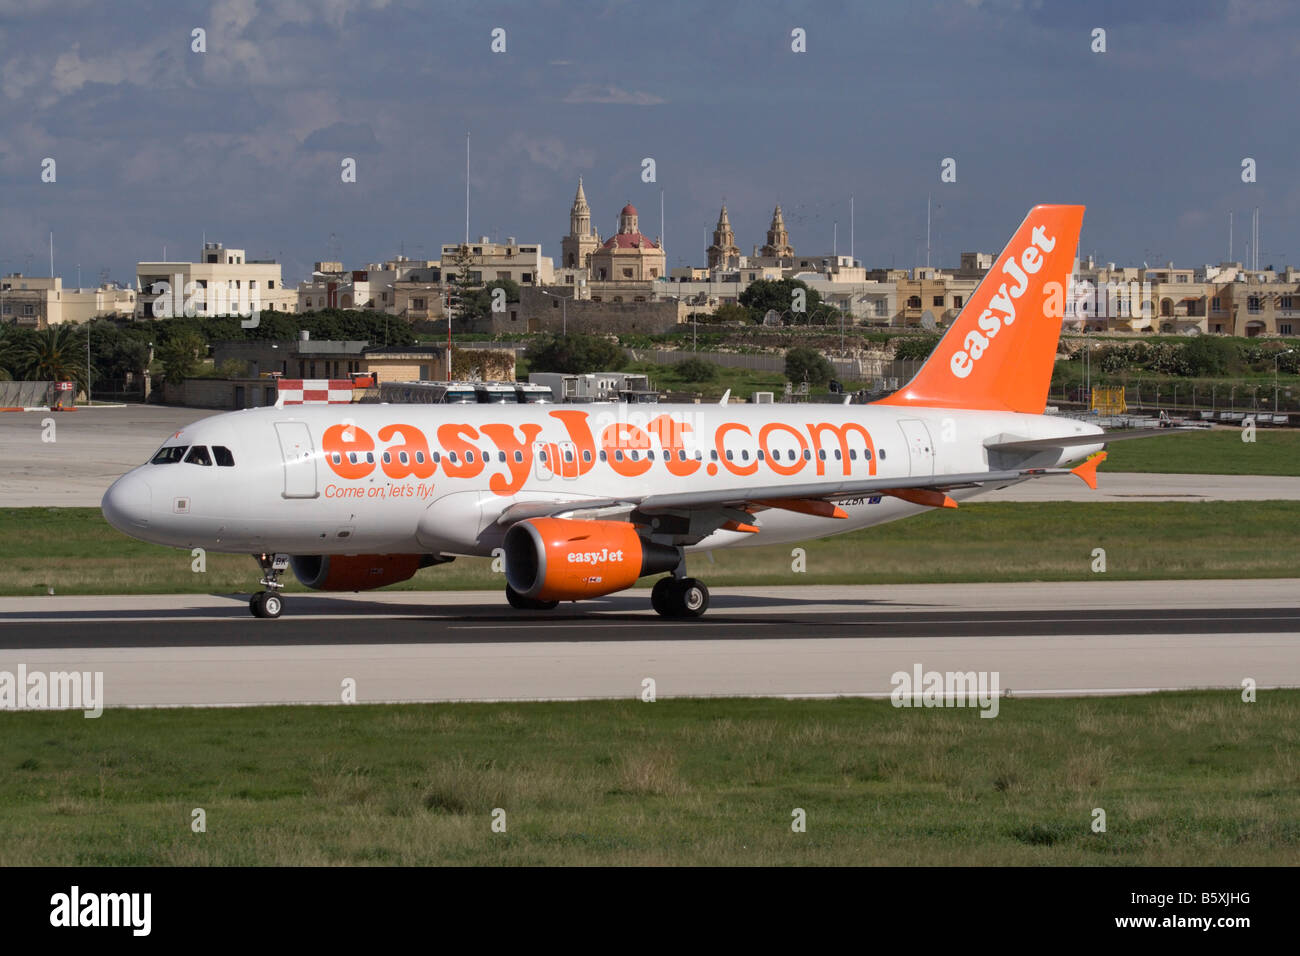 Low cost air travel. Airbus A319 jet plane belonging to budget airline easyJet shown departing from Malta Stock Photo